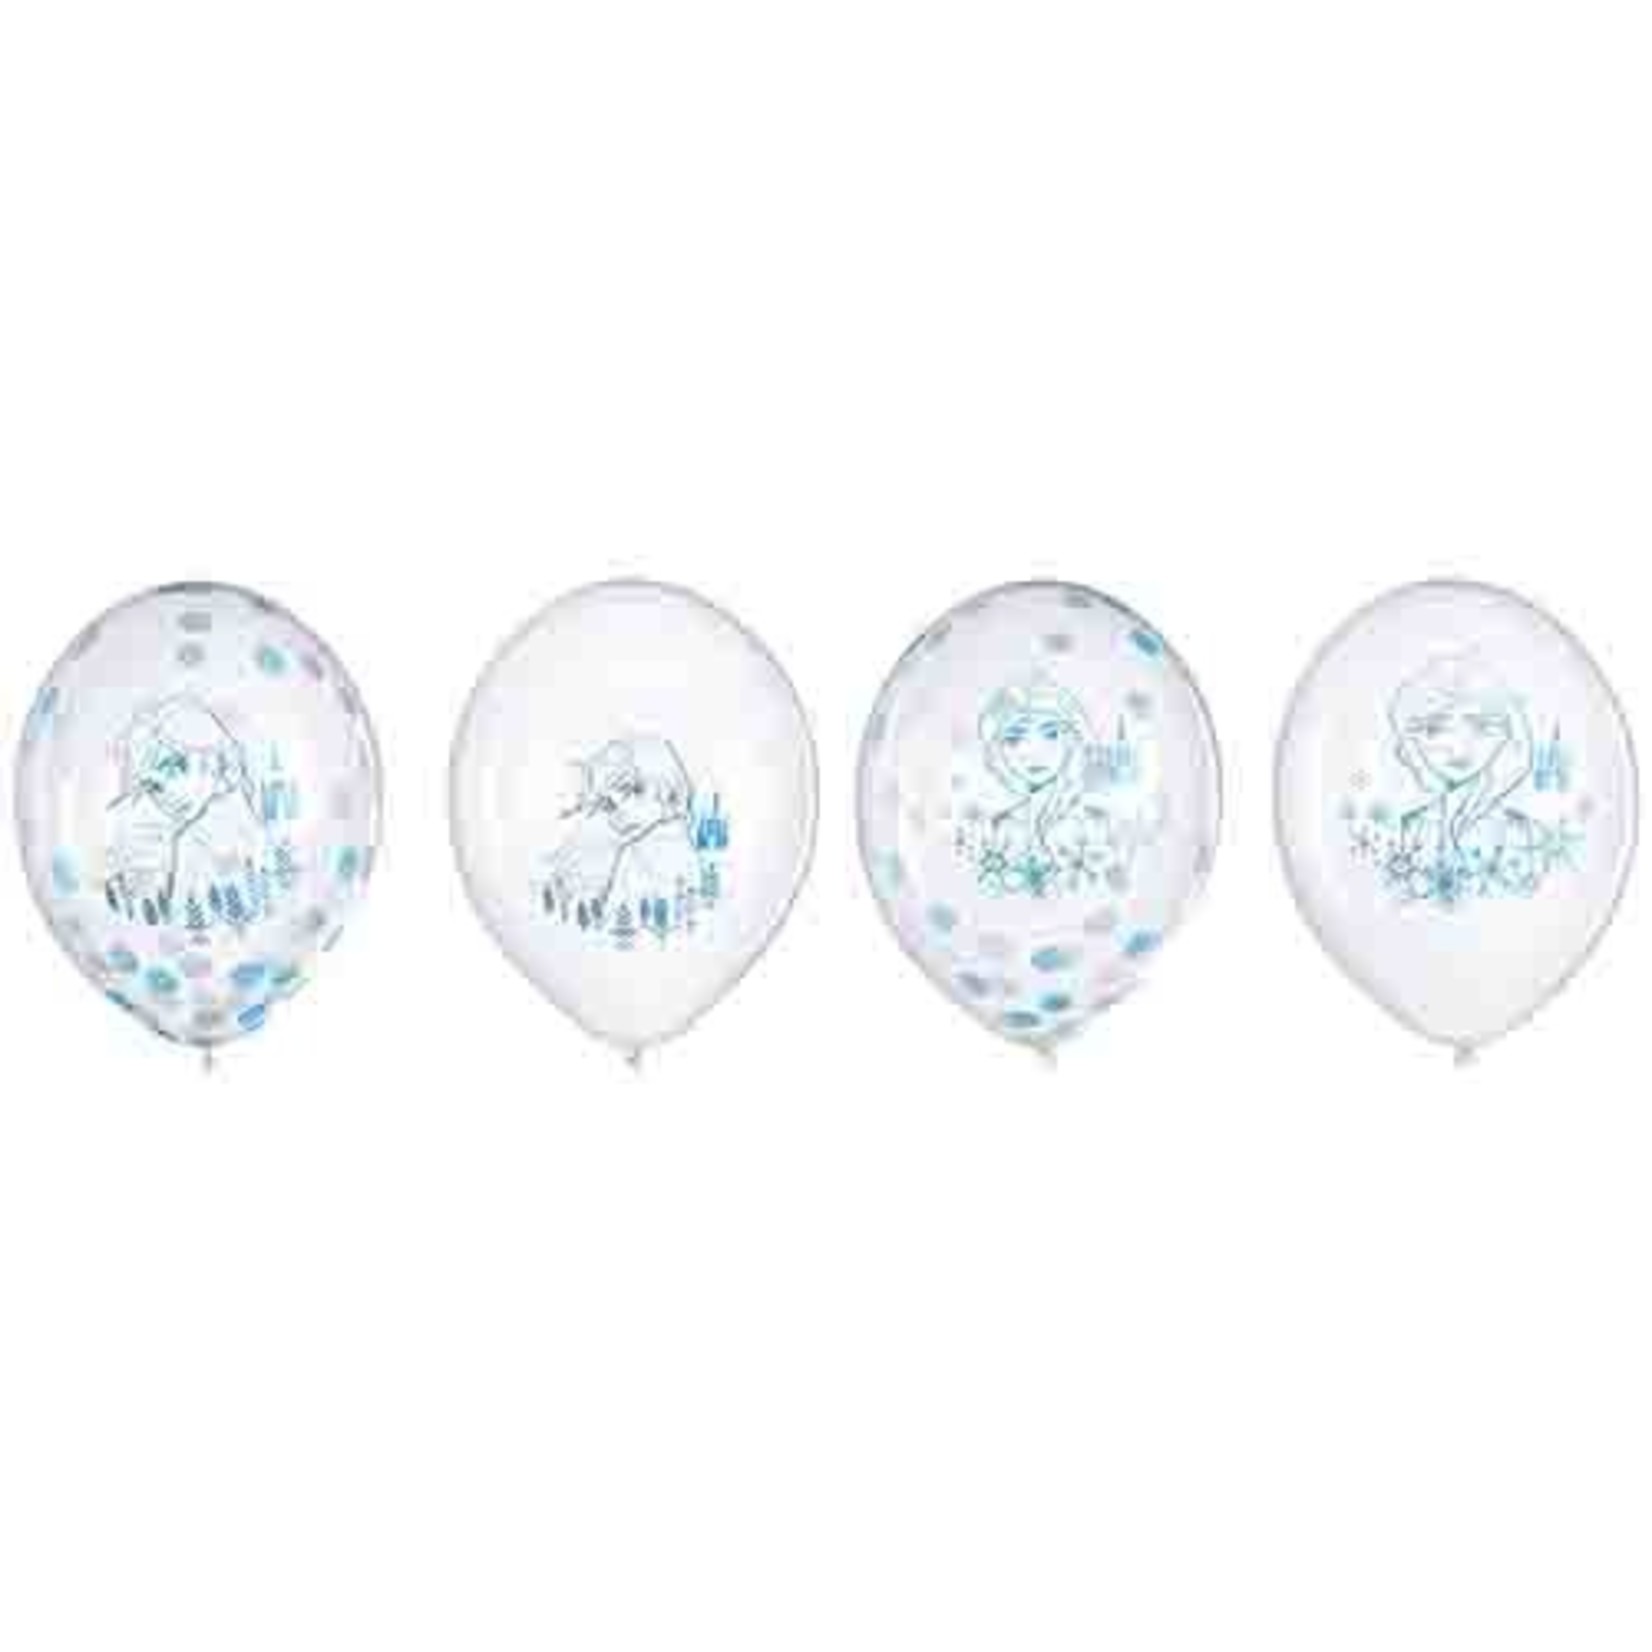 Amscan 12" Disney's Frozen Confetti-Filled Latex Balloons - 6ct.